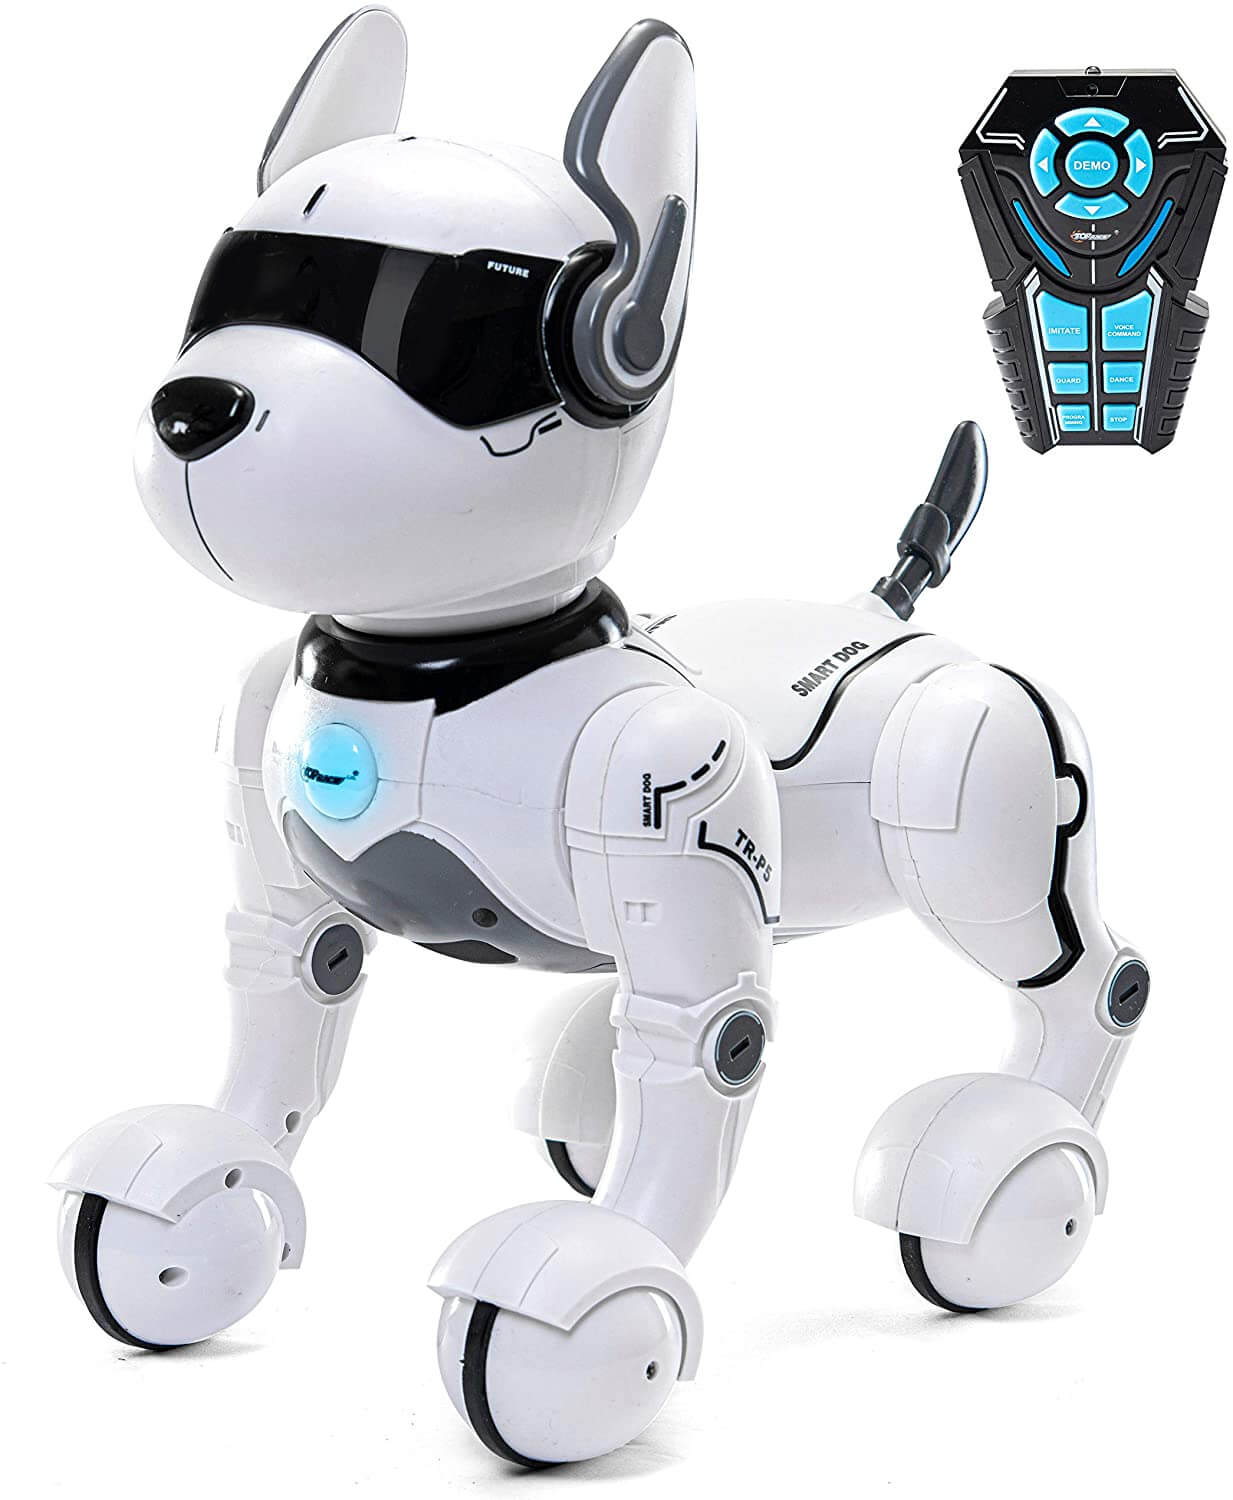 Interactive Pet Robot Dog Light & Music Puppy Educational Toy Gift For Kids UK 